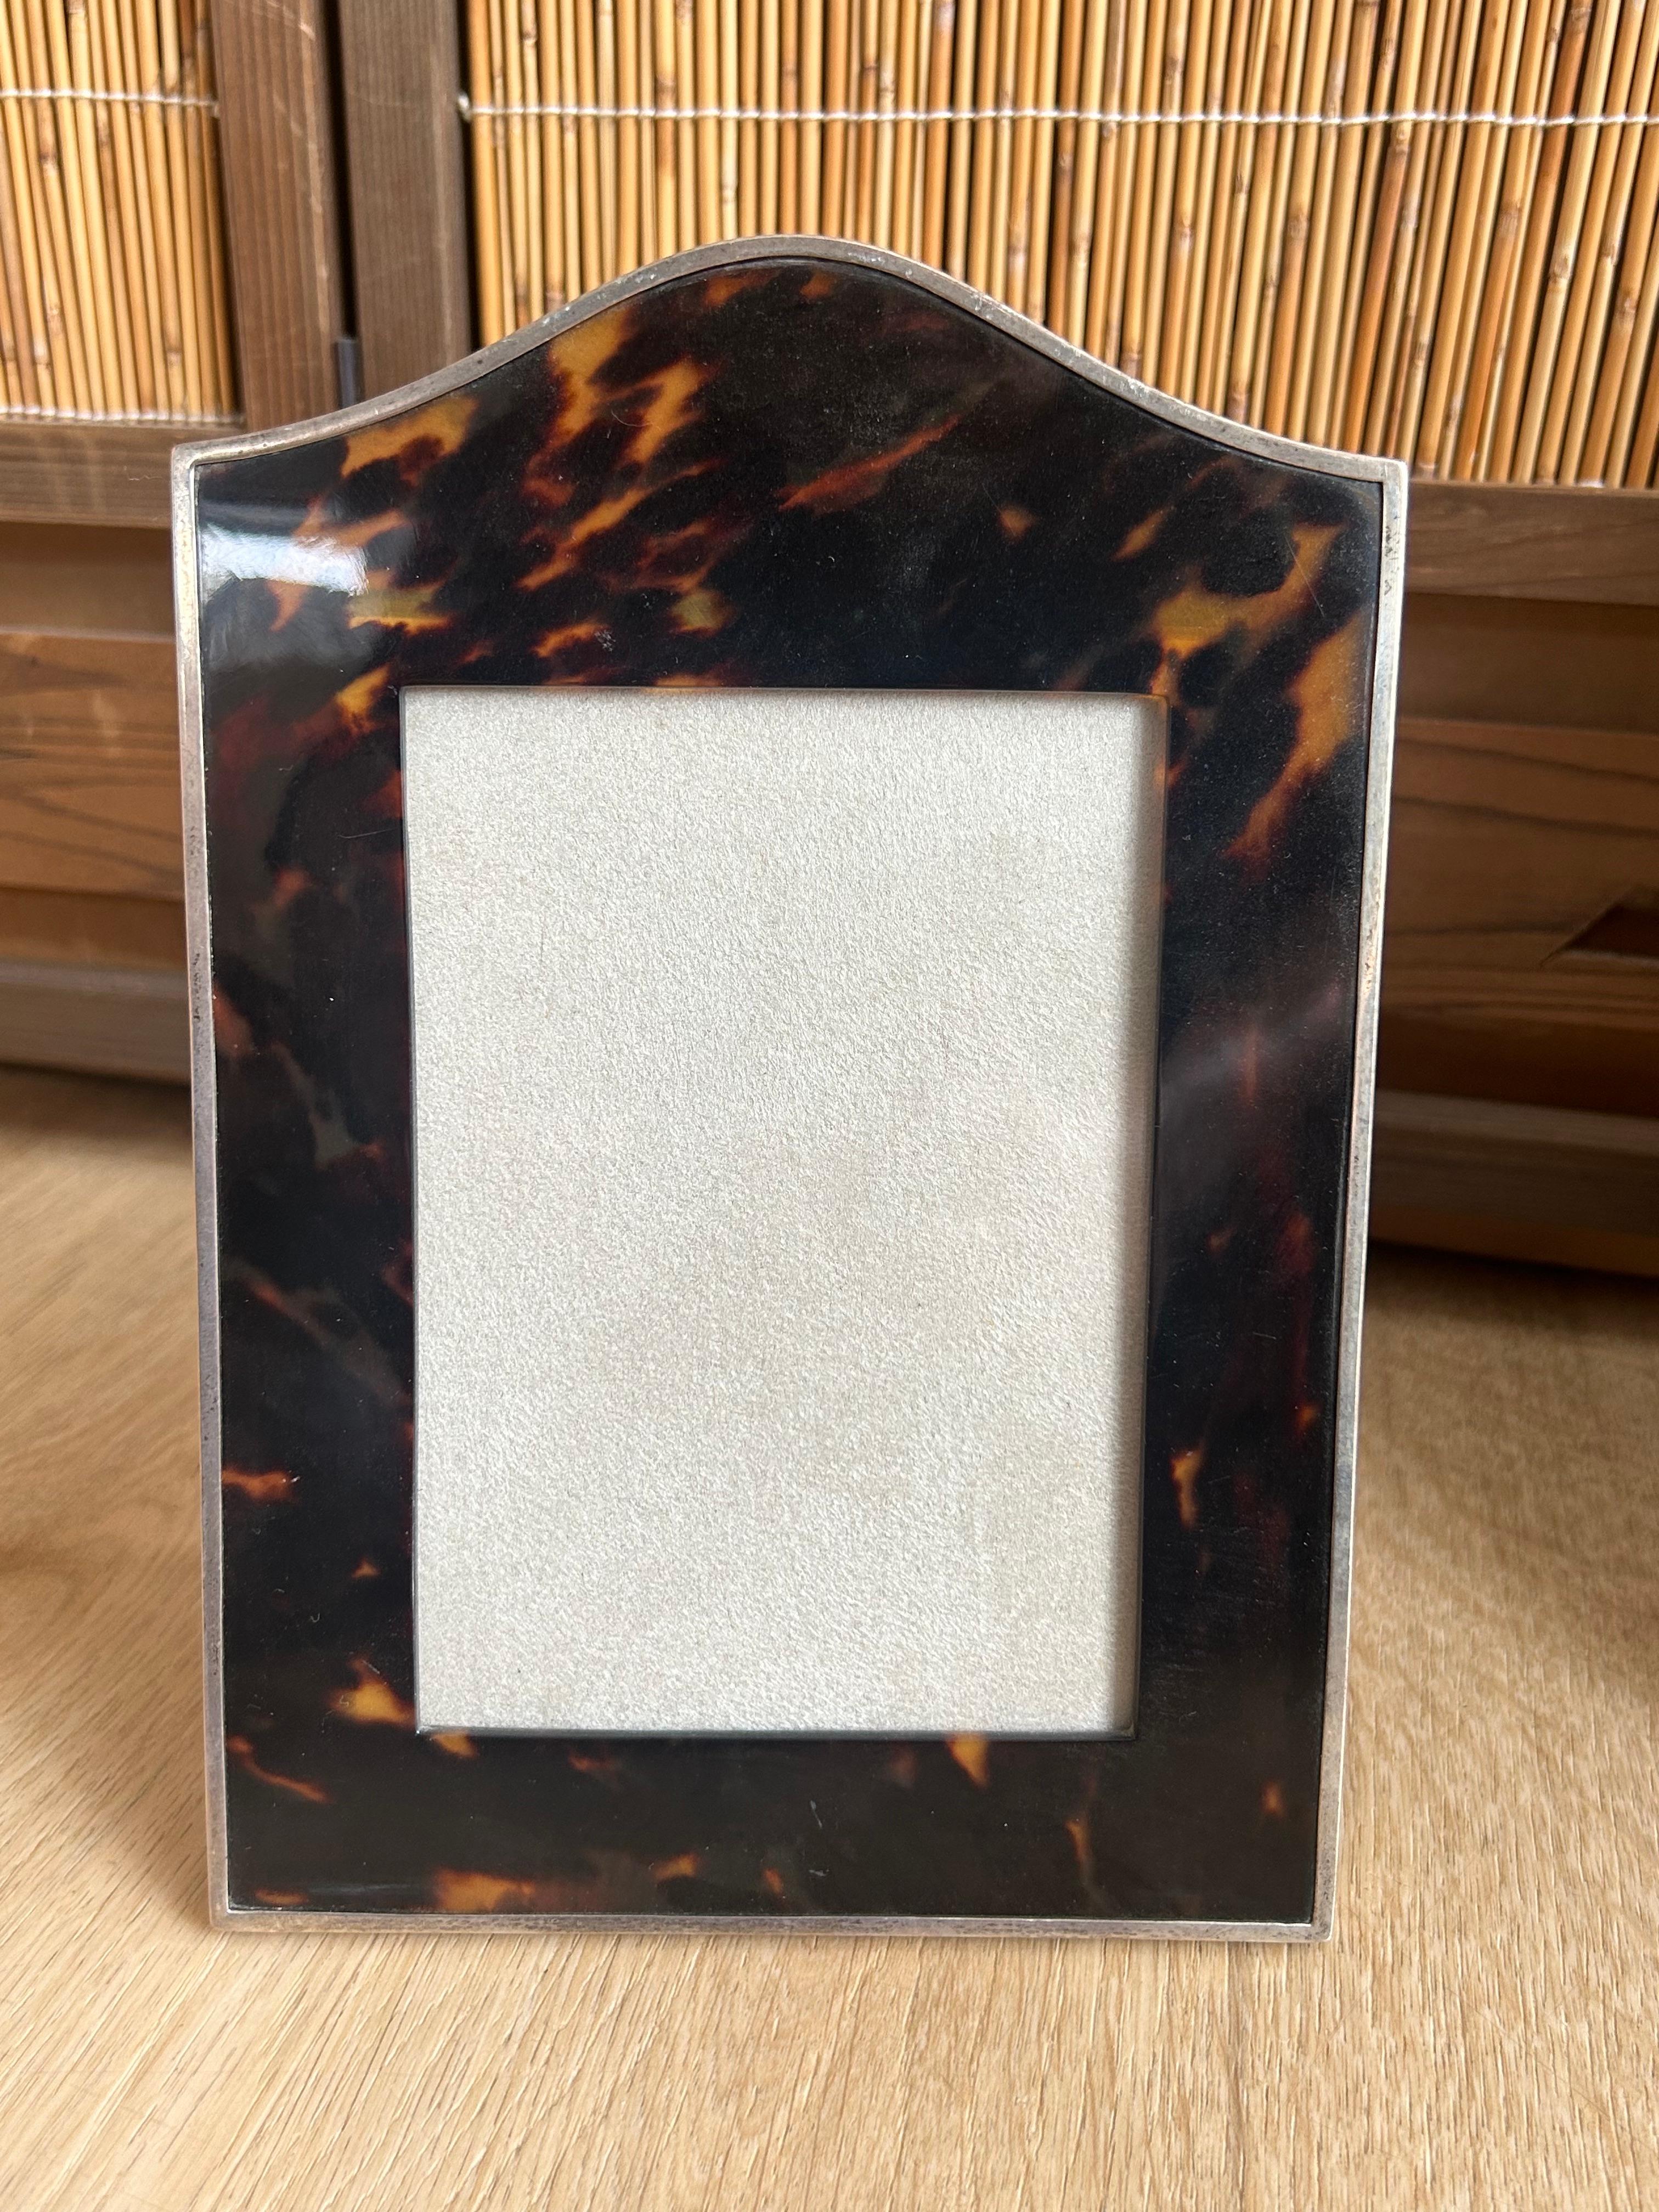 One tortoiseshell Photograph Frames with silver rims and suede backings.
A Photograph Frame with arched top, London 1913, mark of W.C for William Comyns & Sons Ltd

The pictures are part of the description

Warning: Since this items are made of a